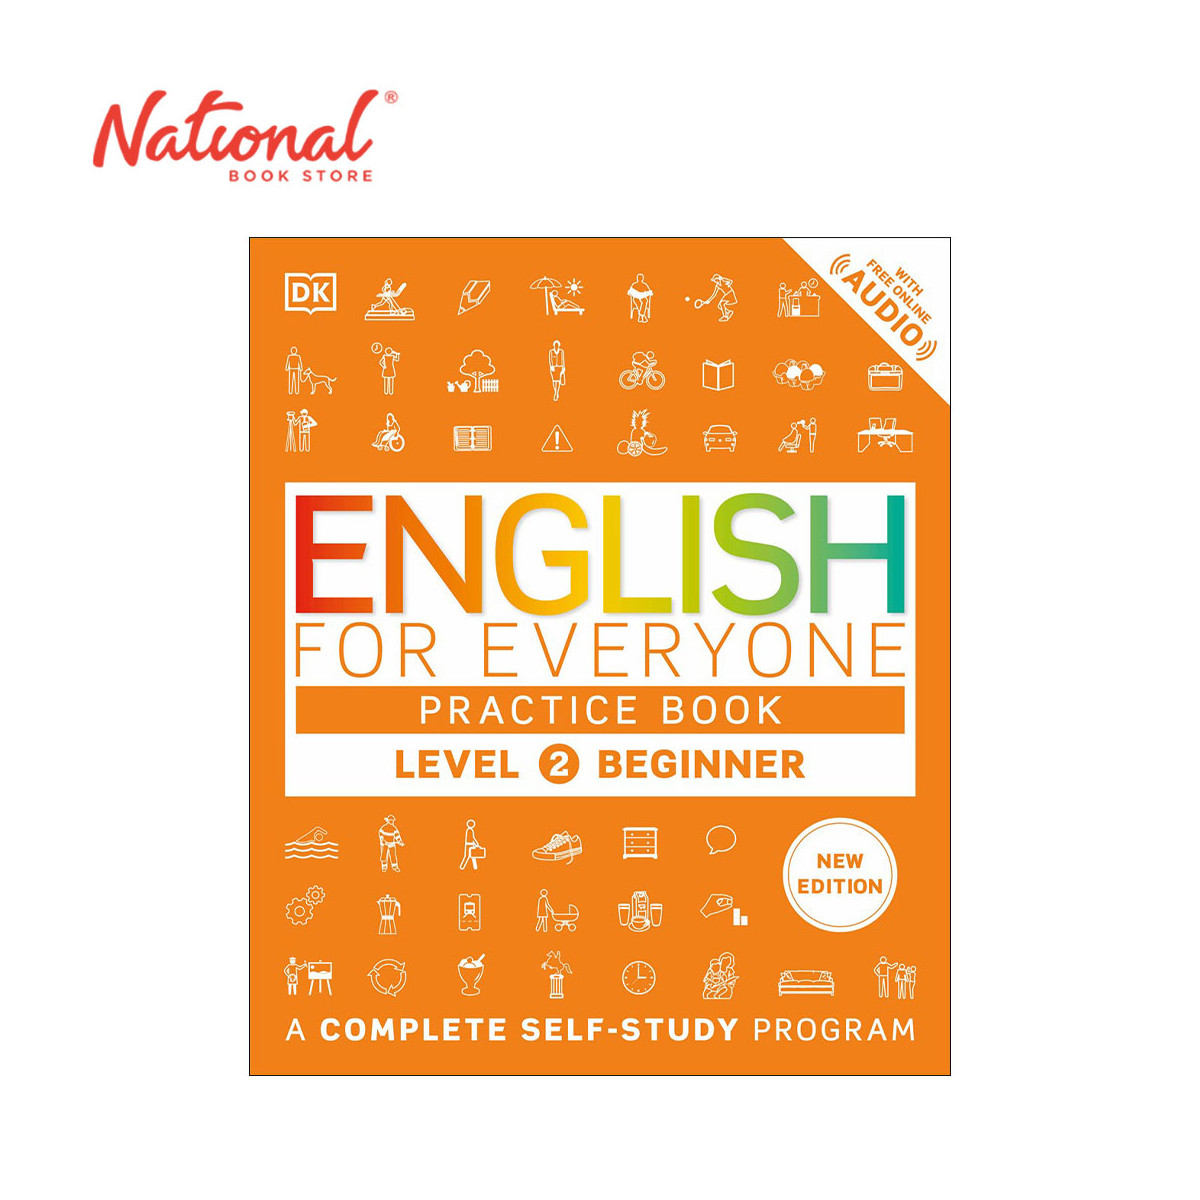 *PRE-ORDER* English for Everyone Practice Book Level 2 Beginner by DK - Trade Paperback - Reference Books